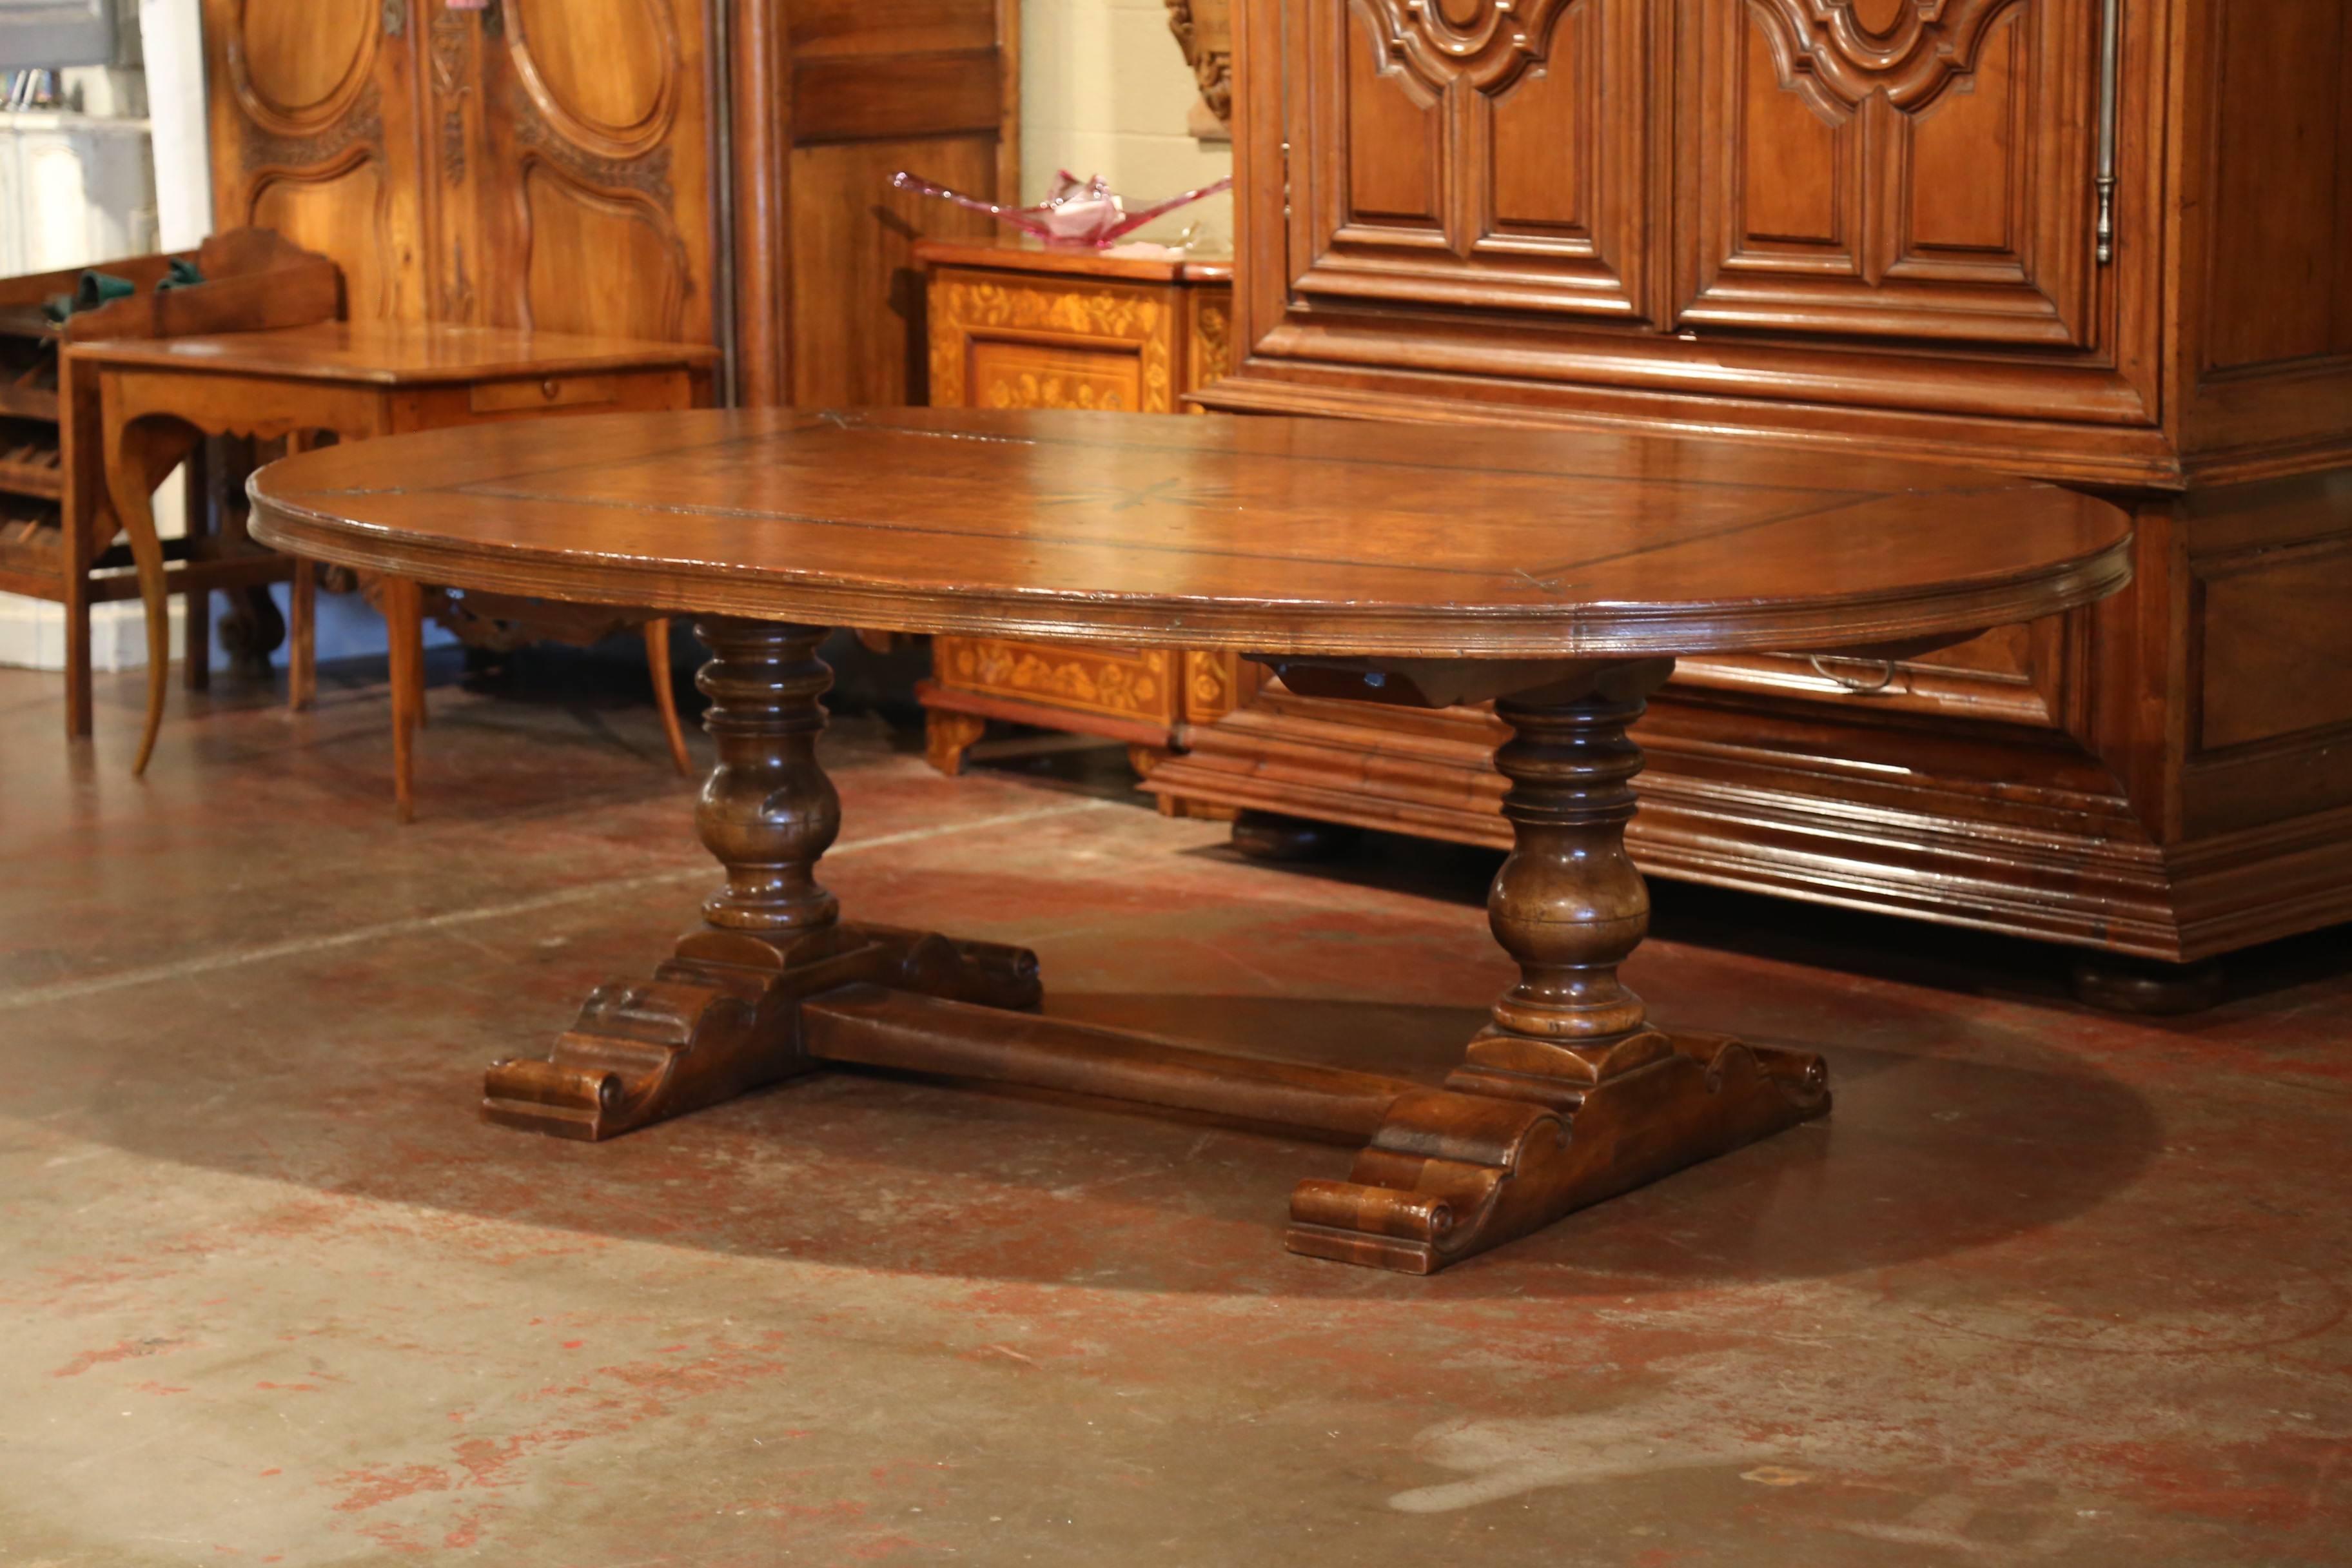 This elegant and large fruitwood table was crafted in the Pyrenees Mountains of France using 18th century wood; the table was crafted using different types of luxurious wood: walnut, chestnut, burl walnut and ebony. The oval surface of the table